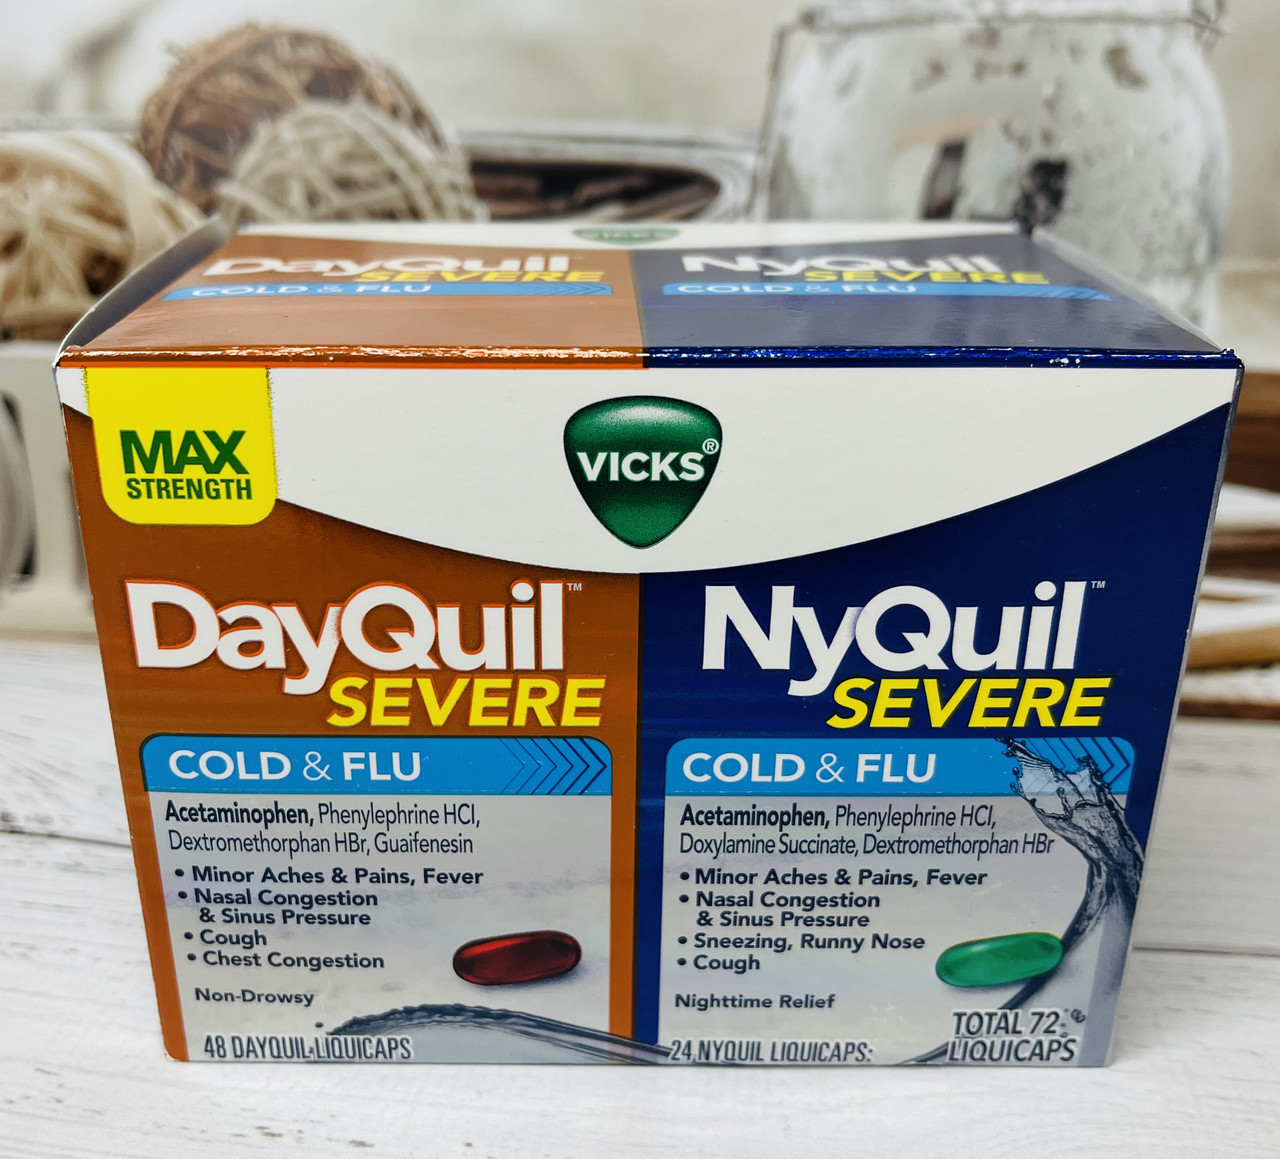 Капсули проти застуди та кашлю VICKS MAX Strenght DayQuil and NyQuil Liquicaps